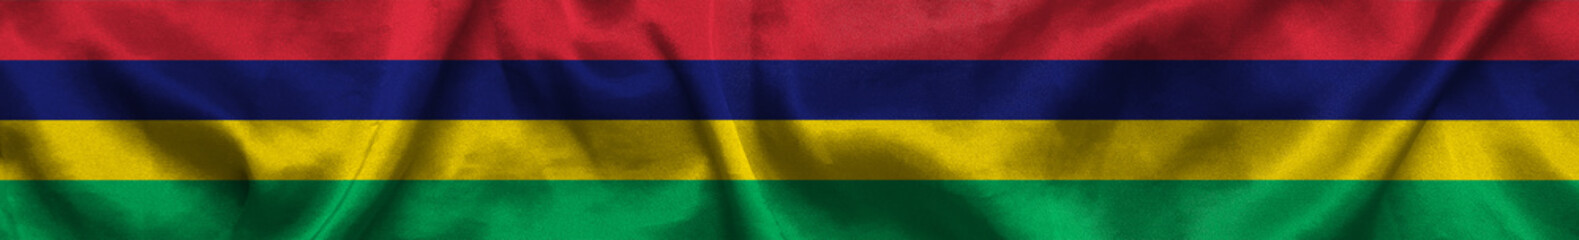 Elongated national flag of Mauritius with a fabric texture fluttering in the wind. Republic of Mauritius flag for website design. 3d illustration